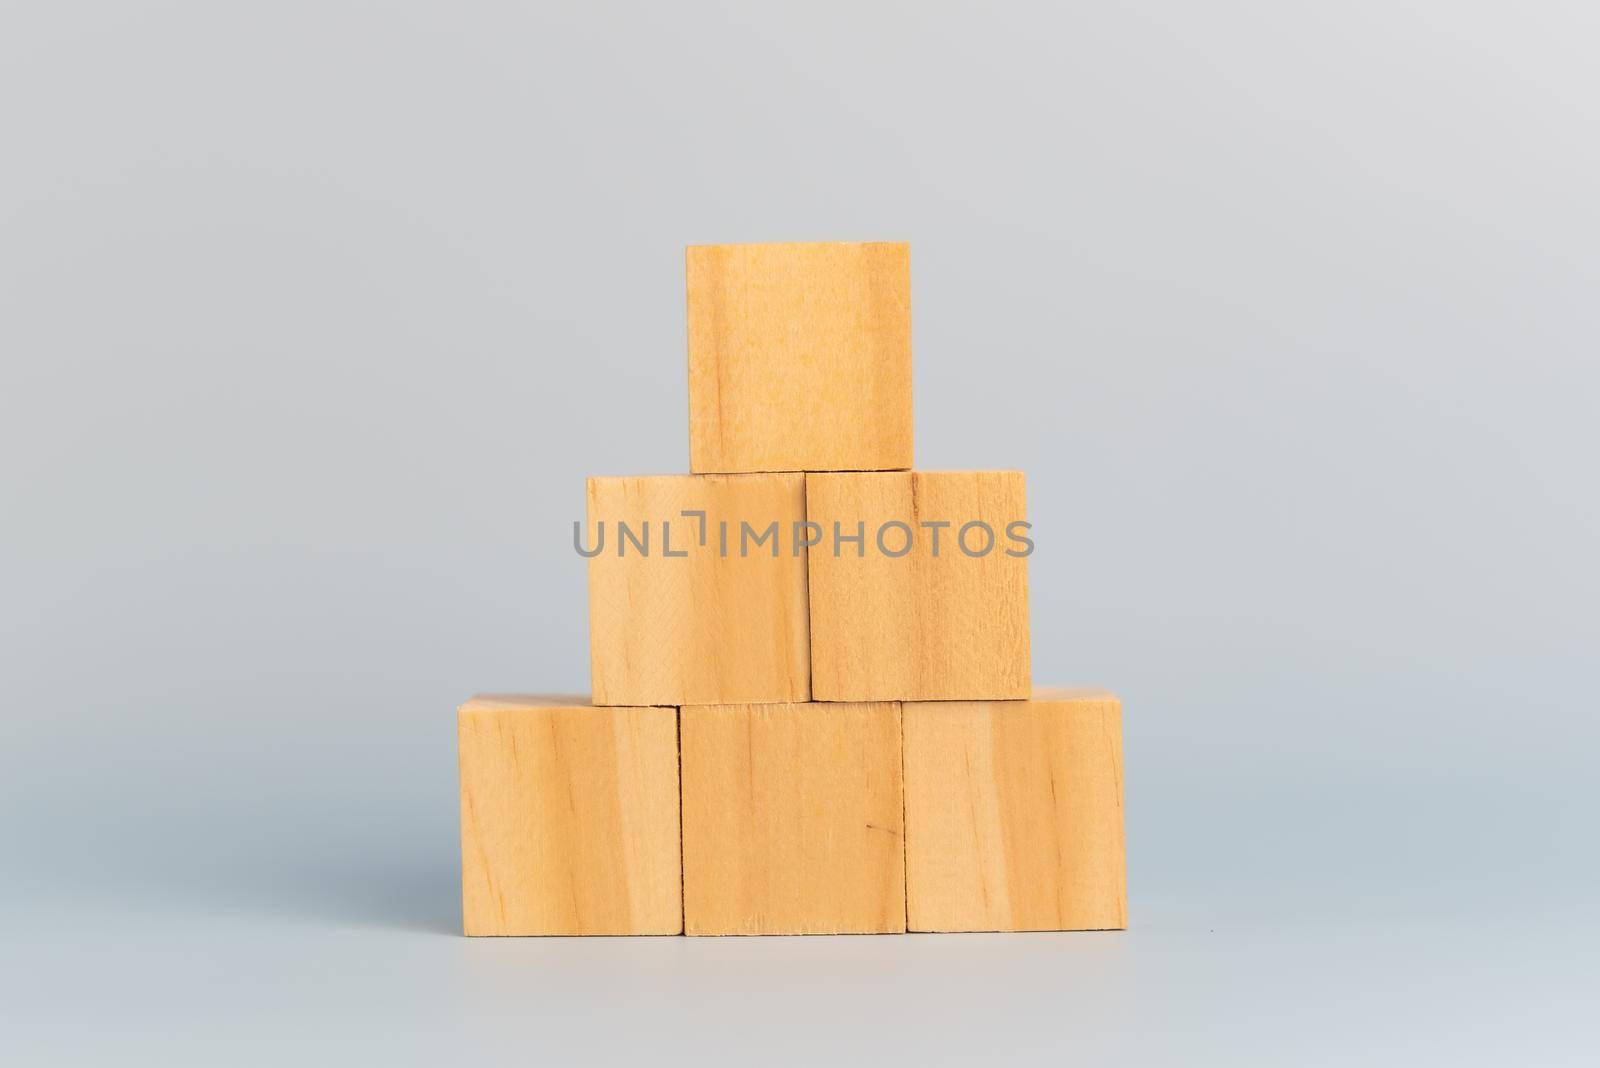 hand holding cube wood block blank on background. copy space